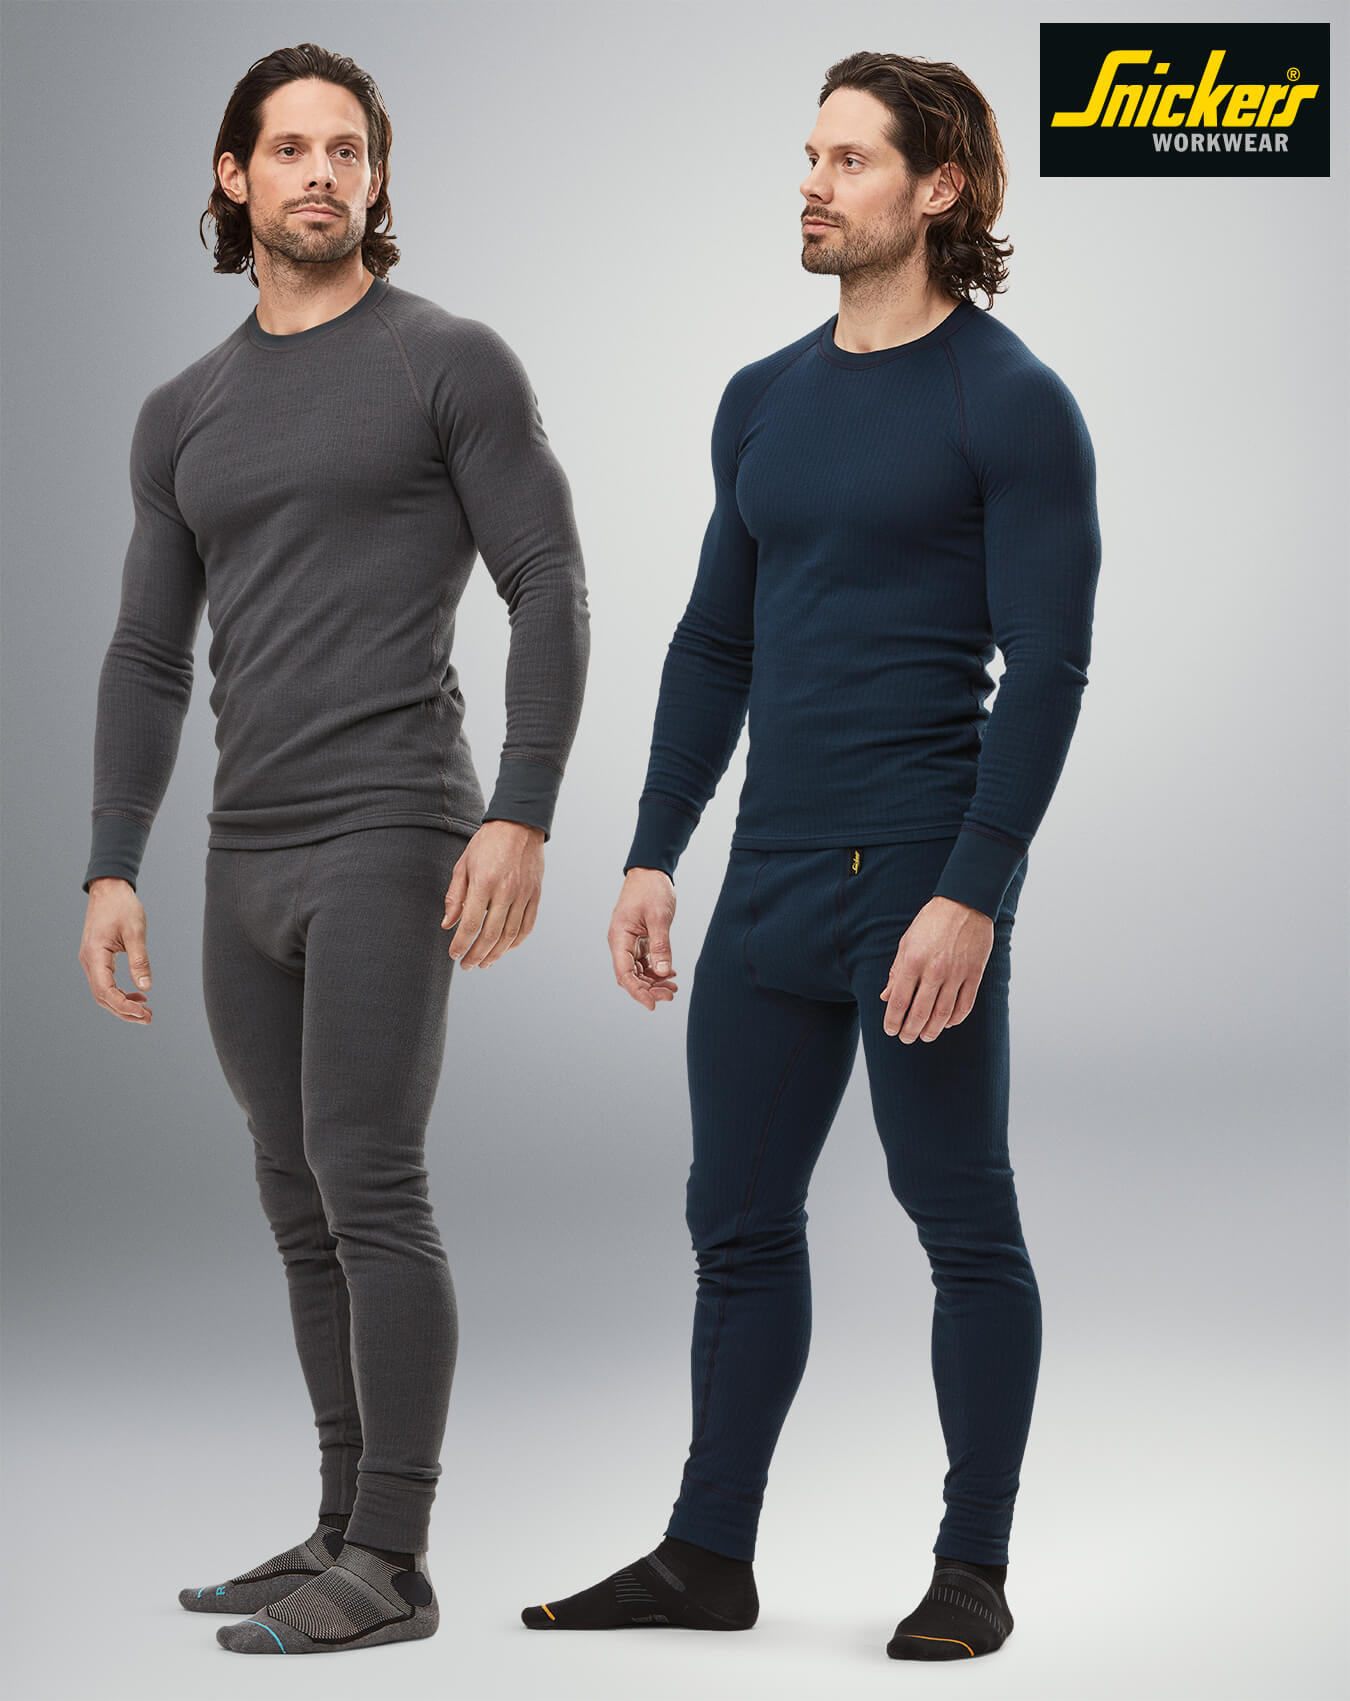 Snickers Workwear Climate Control - Baselayer Underwear